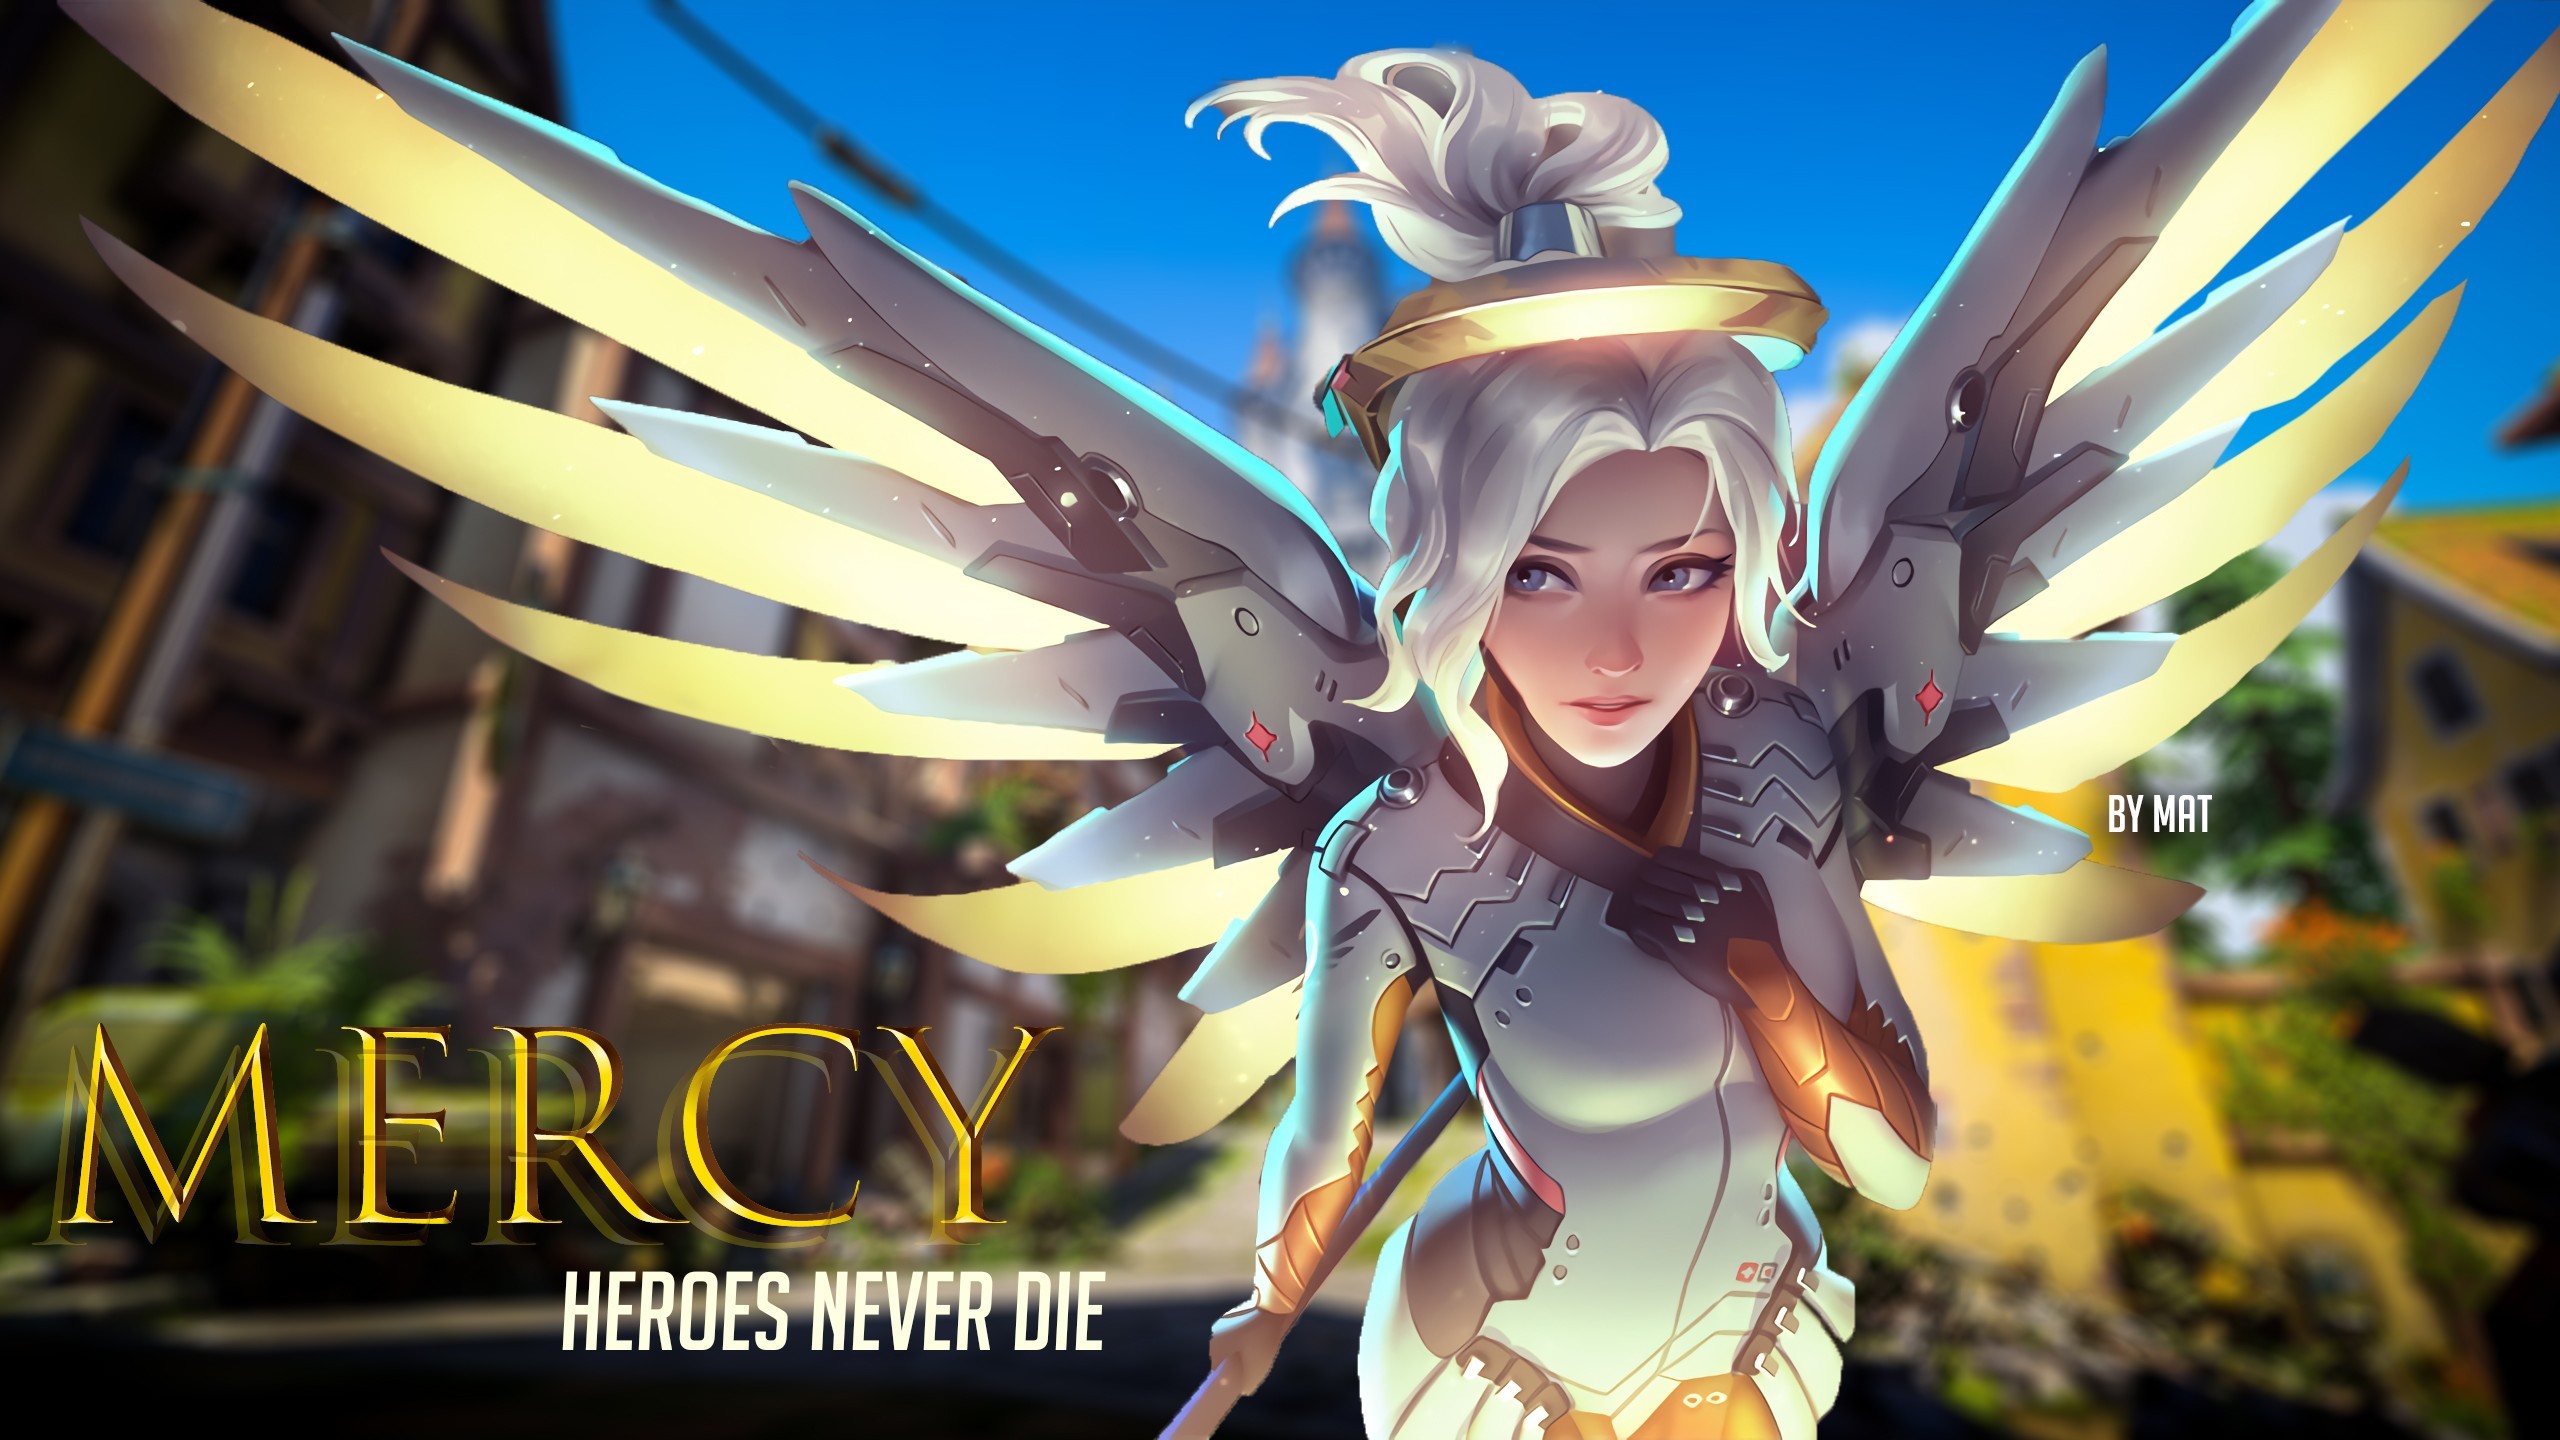 2560x1440 EICHENWALDE(Overwatch), Mercy (Overwatch), PC gaming, Graphic design  Wallpapers HD / Desktop and Mobile Backgrounds